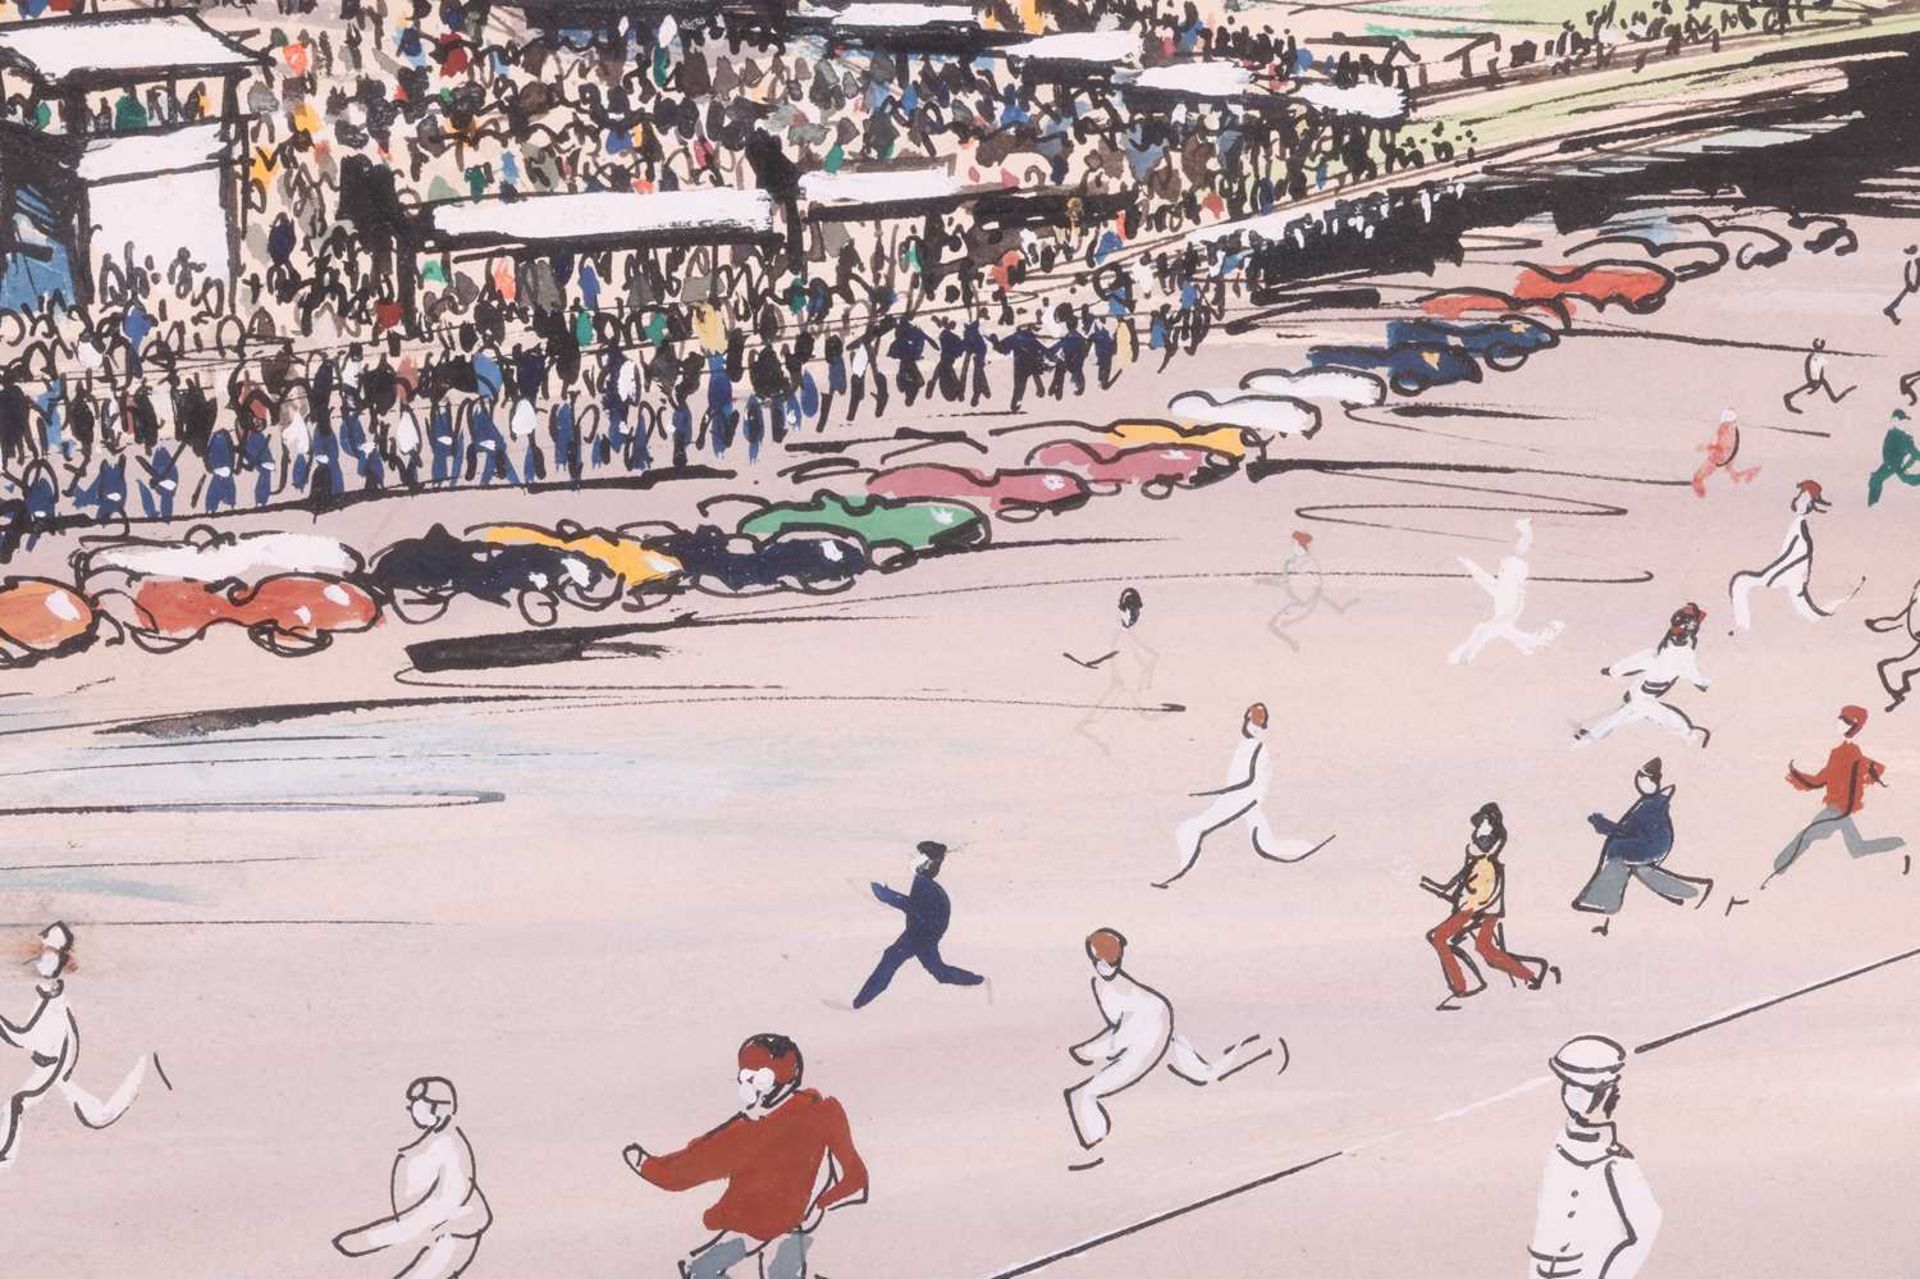 John Paddy Carstairs (1916 - 1970), 'Le Mans - The Start of the Race', signed 'John Paddy Carstairs' - Image 8 of 10